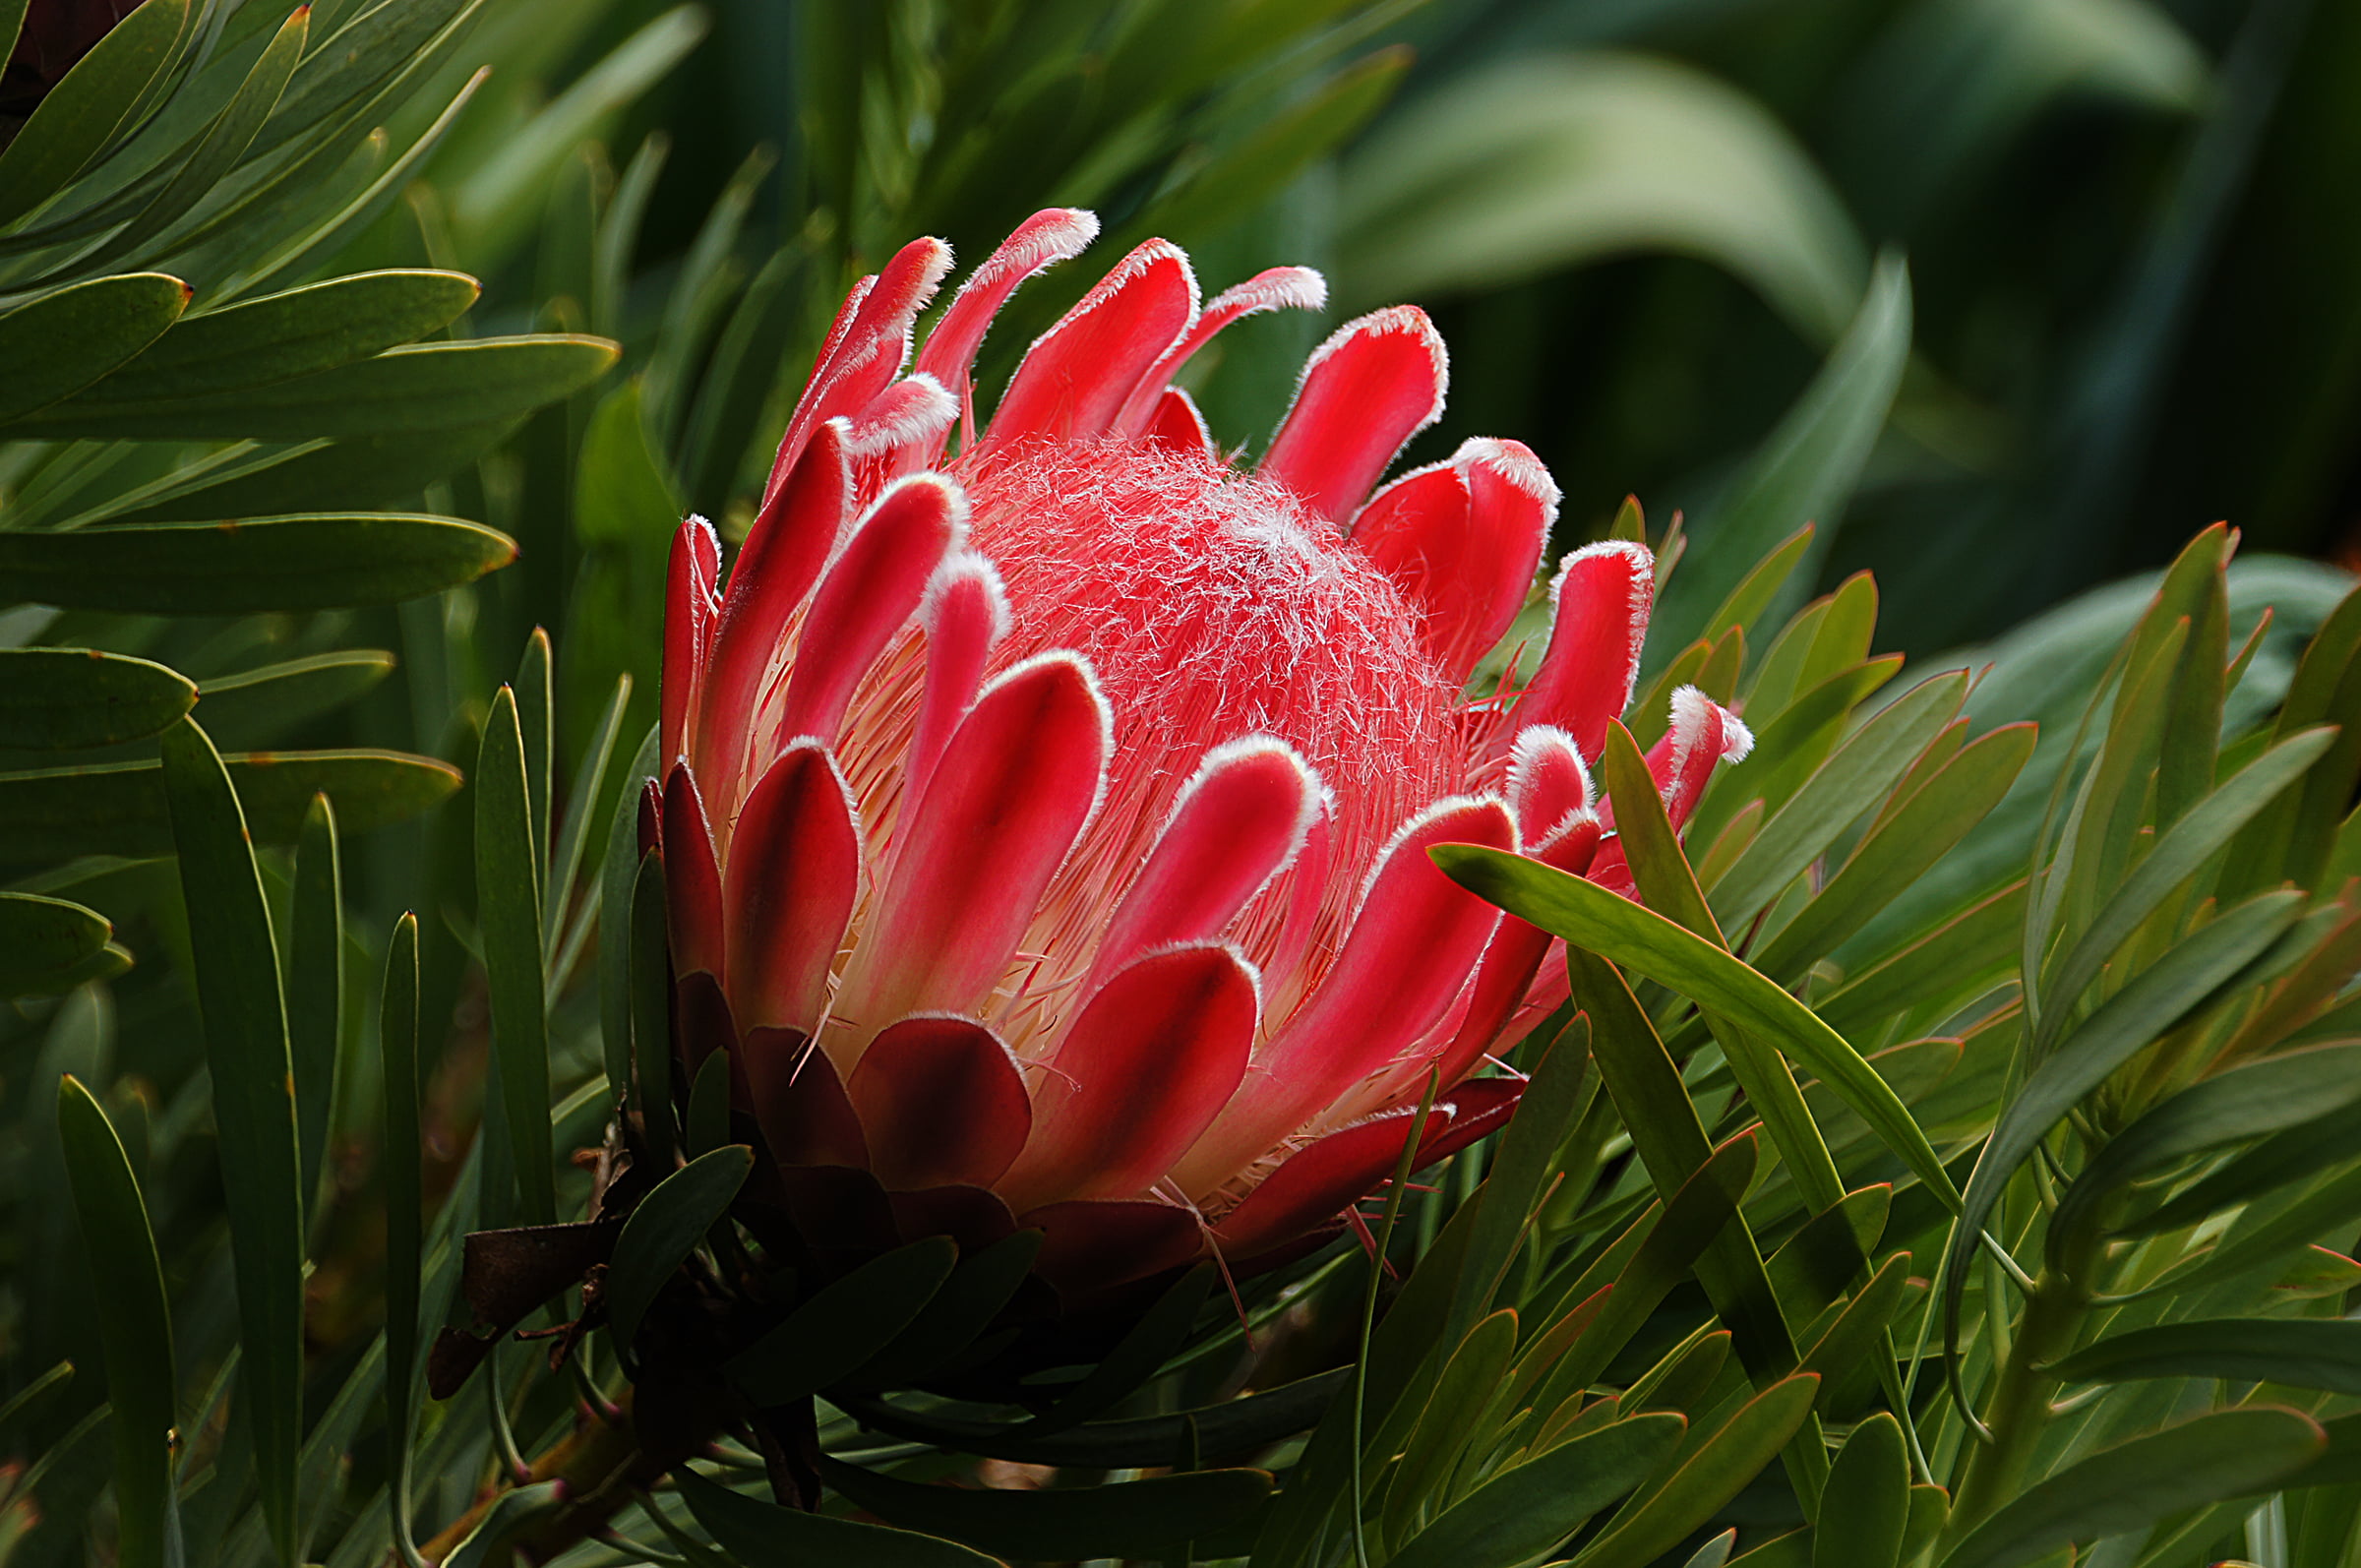 Red Petaled Flower Near Green Grasses, Proteas Hd Wallpaper - Proteas Hd , HD Wallpaper & Backgrounds